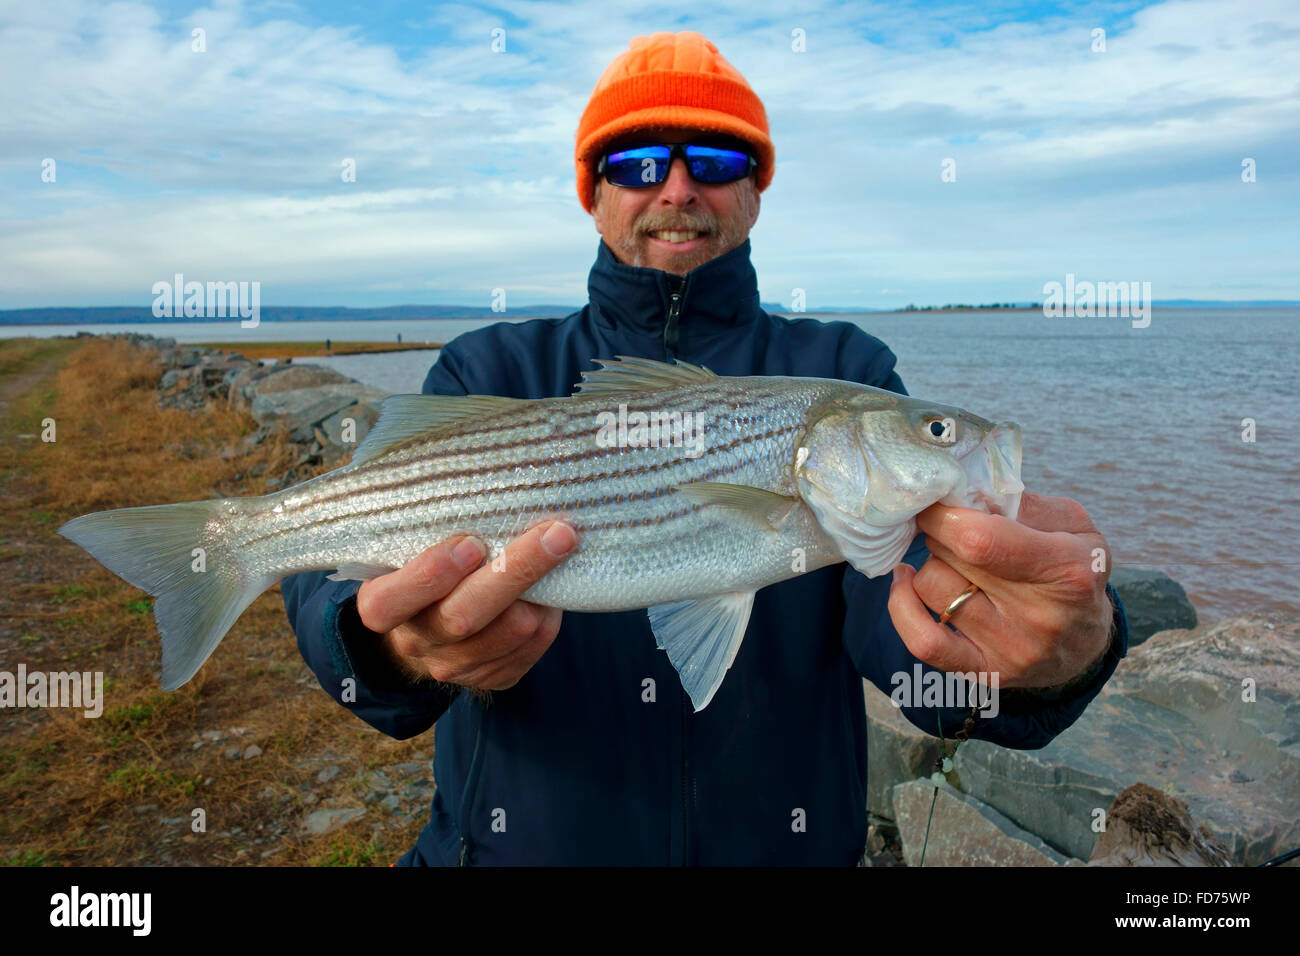 A fisherman holding a striped bass fish (Morone saxatilis) from the Minas  Basin of the Bay of Fundy, Nova Scotia, Canada Stock Photo - Alamy